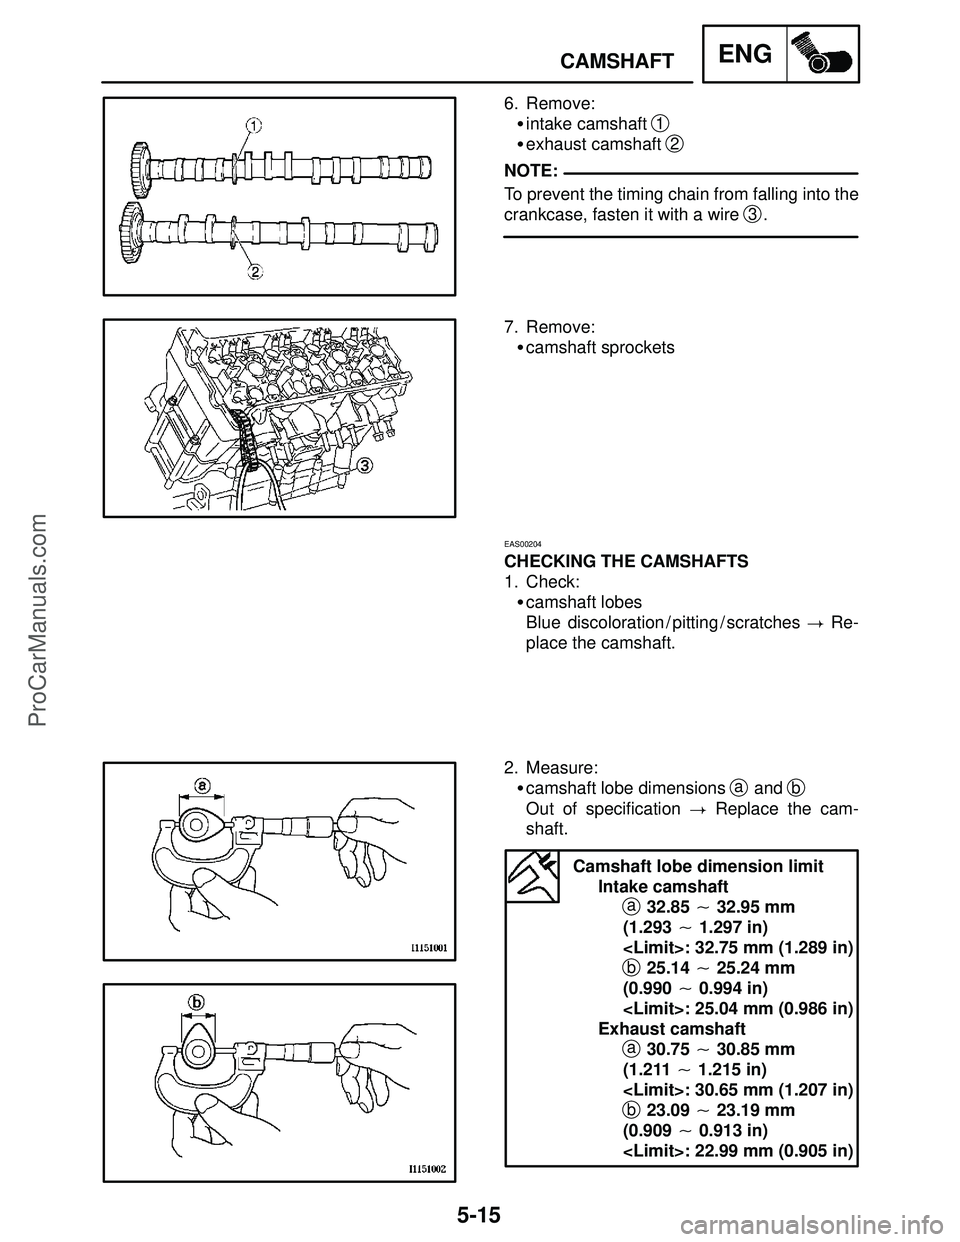 YAMAHA YZF-R1S 2004  Service Manual 5-15
CAMSHAFTENG
NOTE:
6. Remove:
intake camshaft 
1
exhaust camshaft 2
To prevent the timing chain from falling into the
crankcase, fasten it with a wire 
3.
7. Remove:
camshaft sprockets
EAS00204